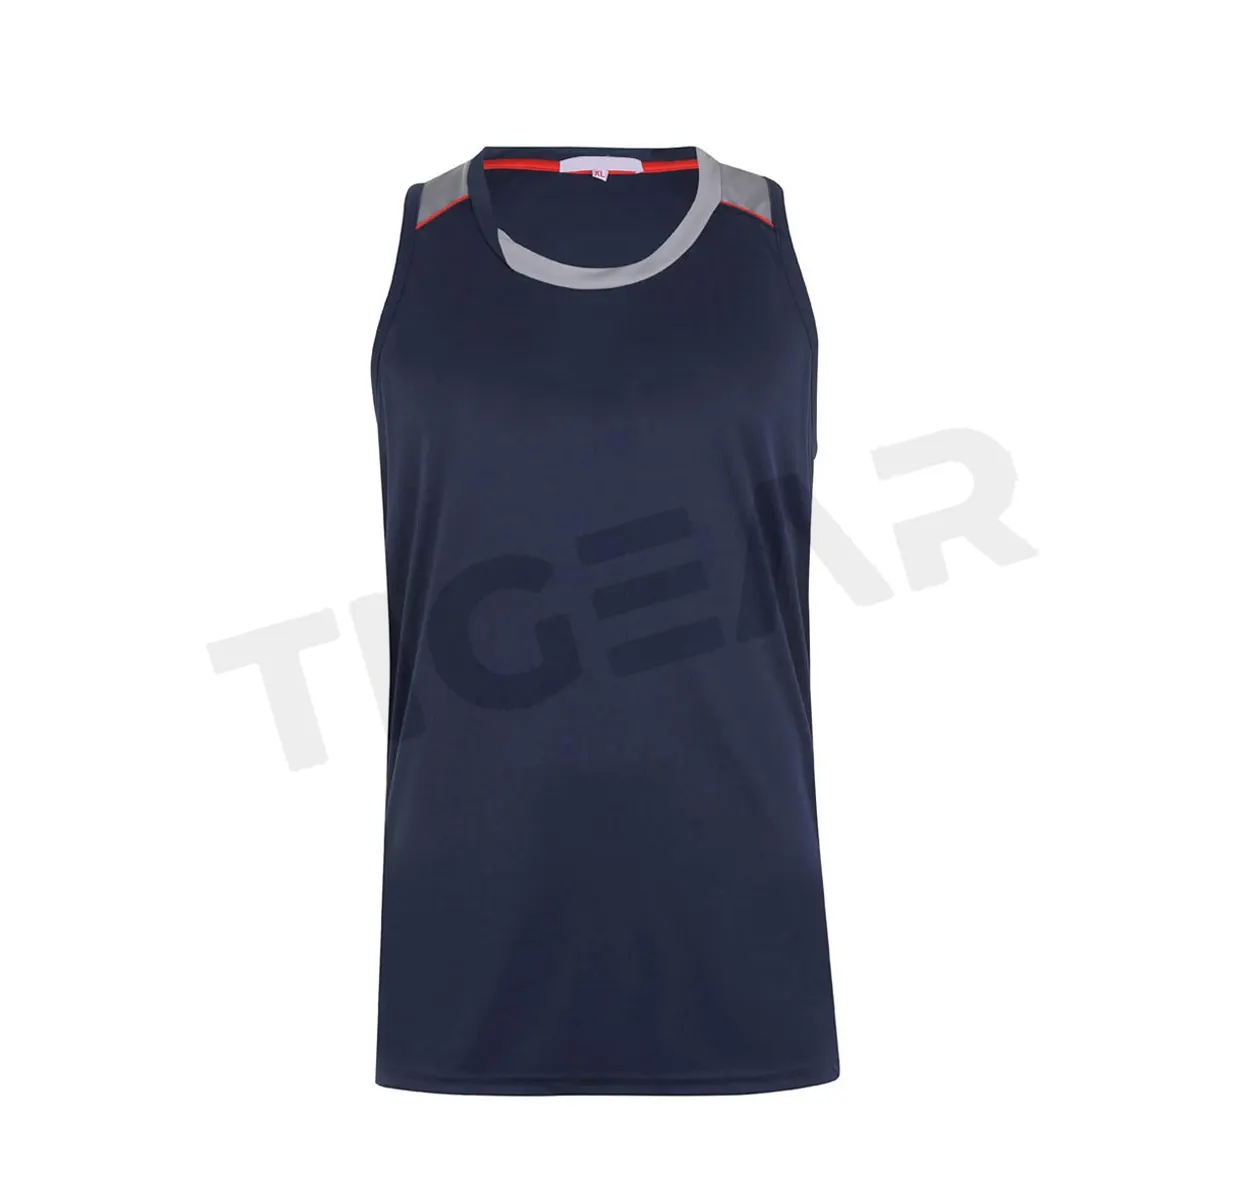 2023 New summer men's crew neck gym tank top oversized graphic washed sleeveless t shirt for men